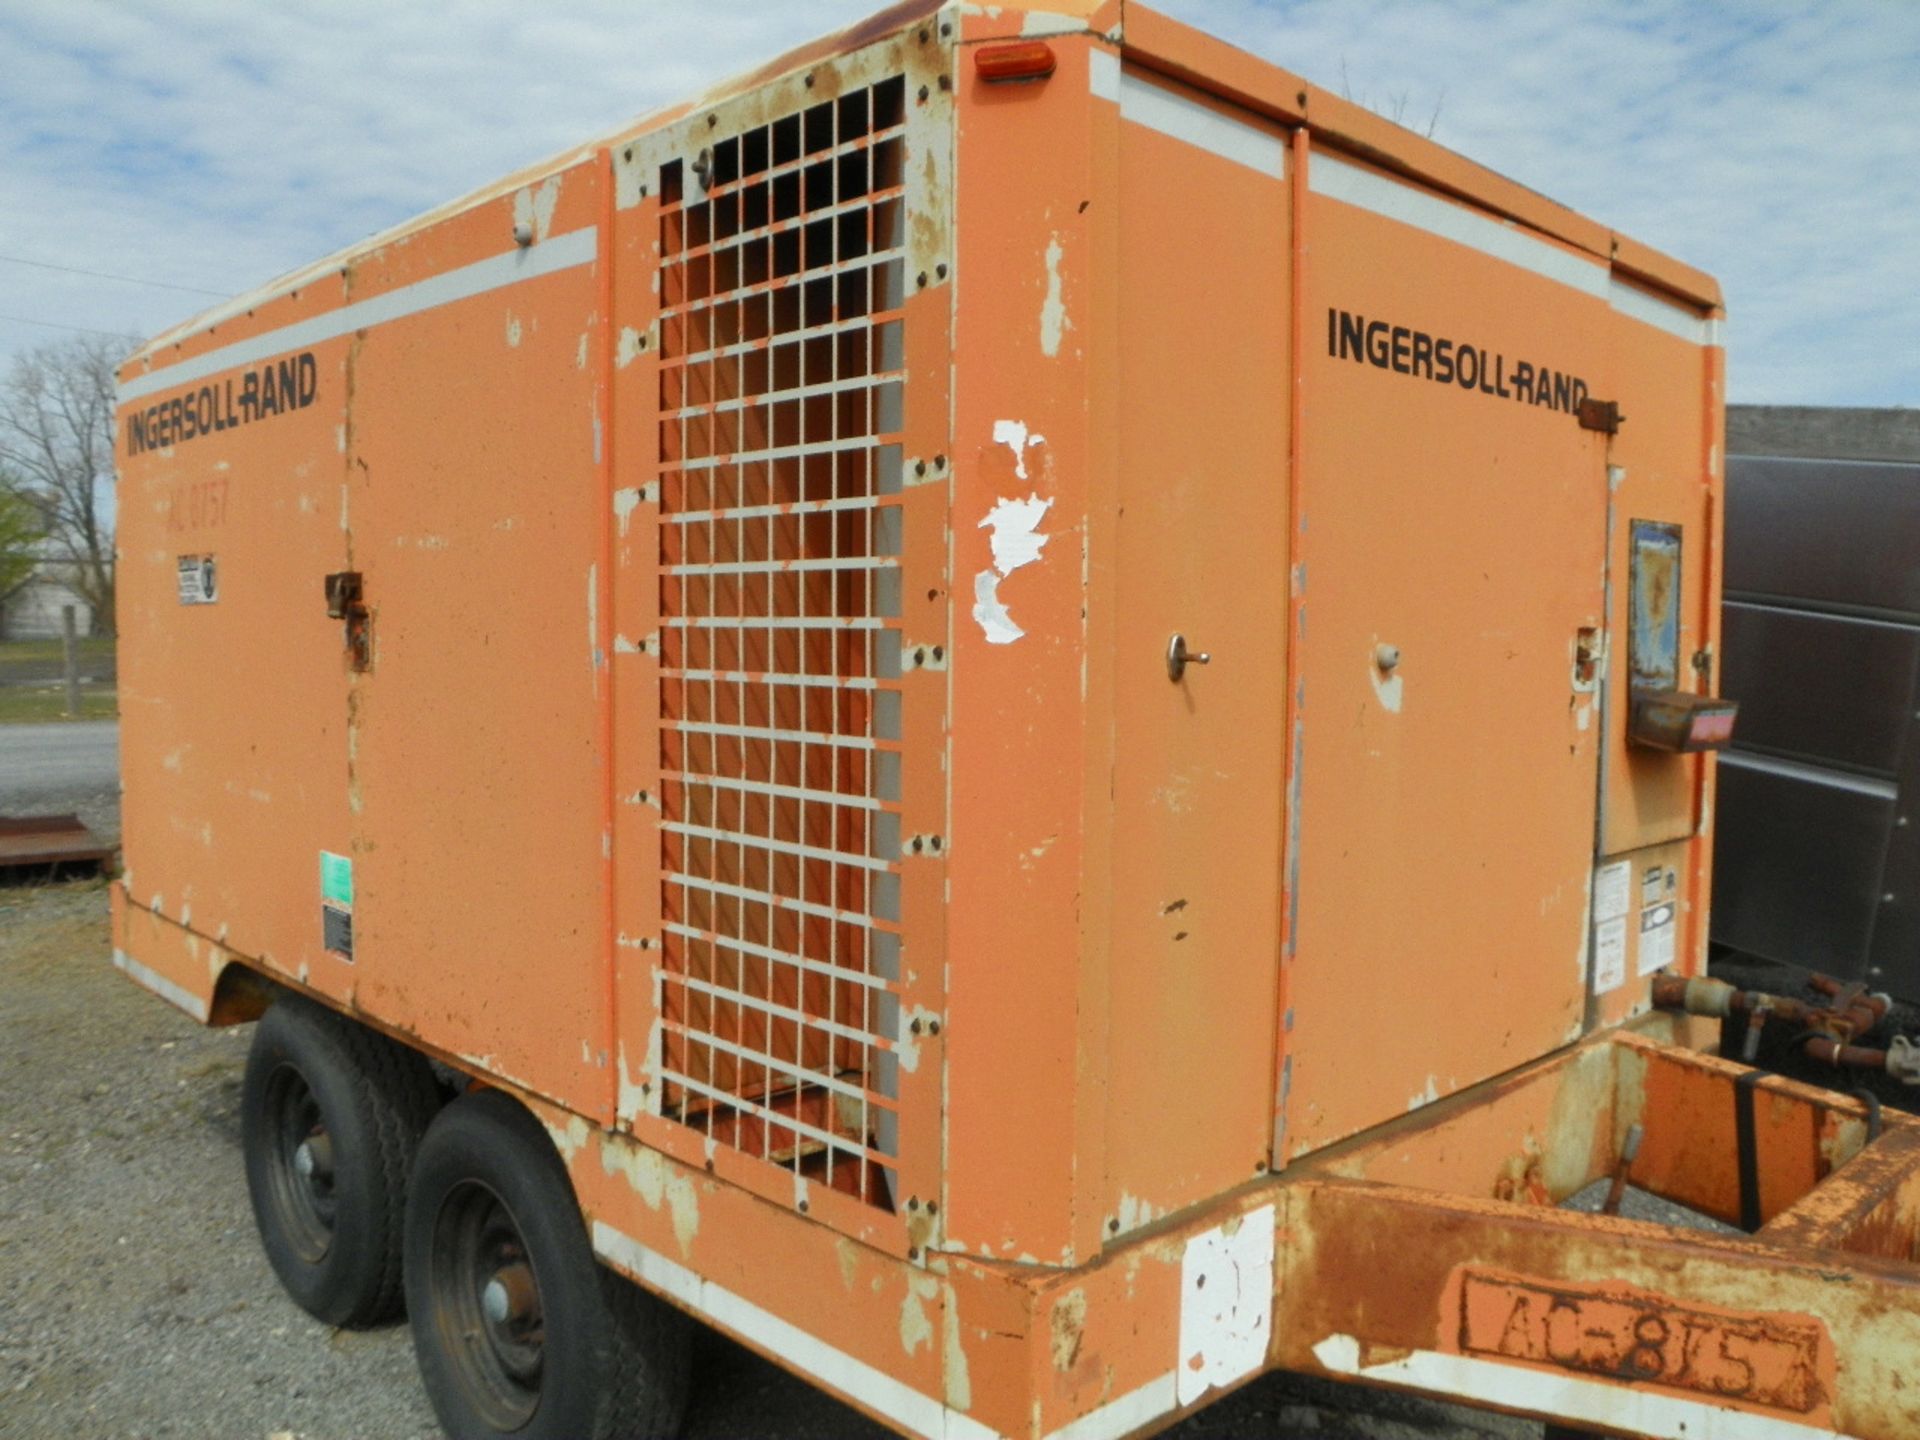 Ingersoll rand air compressor - Image 8 of 8